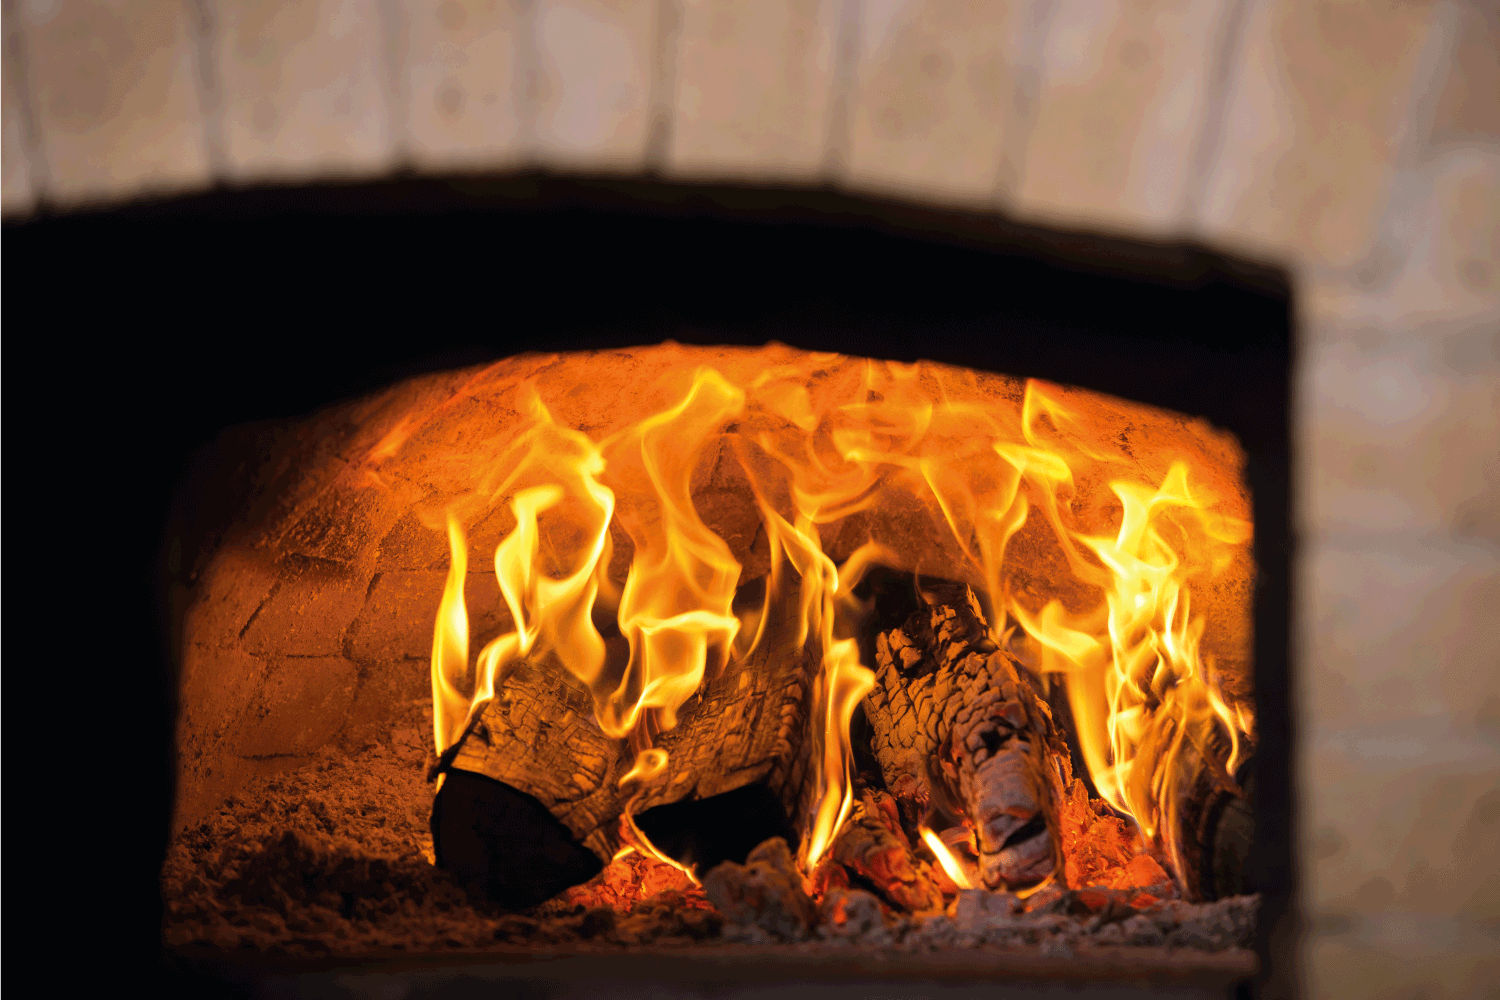 Traditional pizza oven with stone or brick